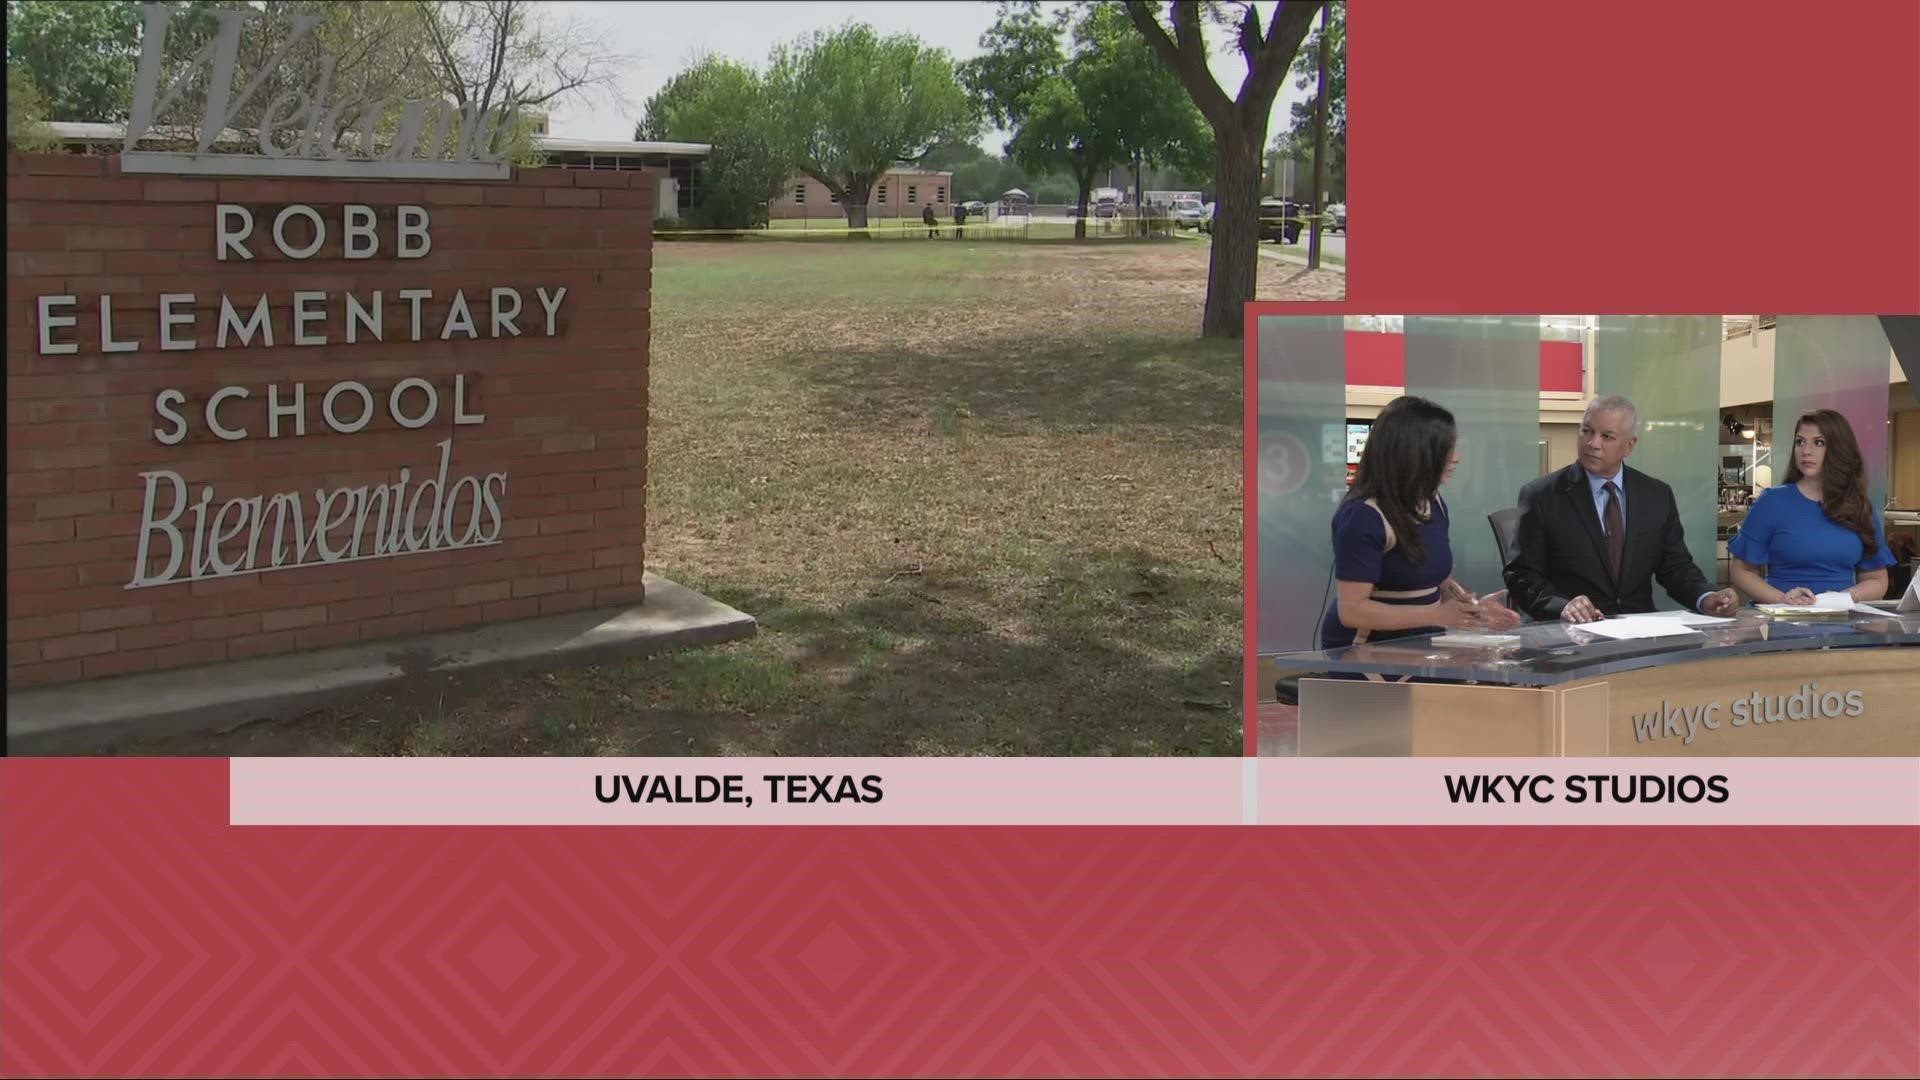 3News' Marisa Saenz offers perspective as a Texas native.